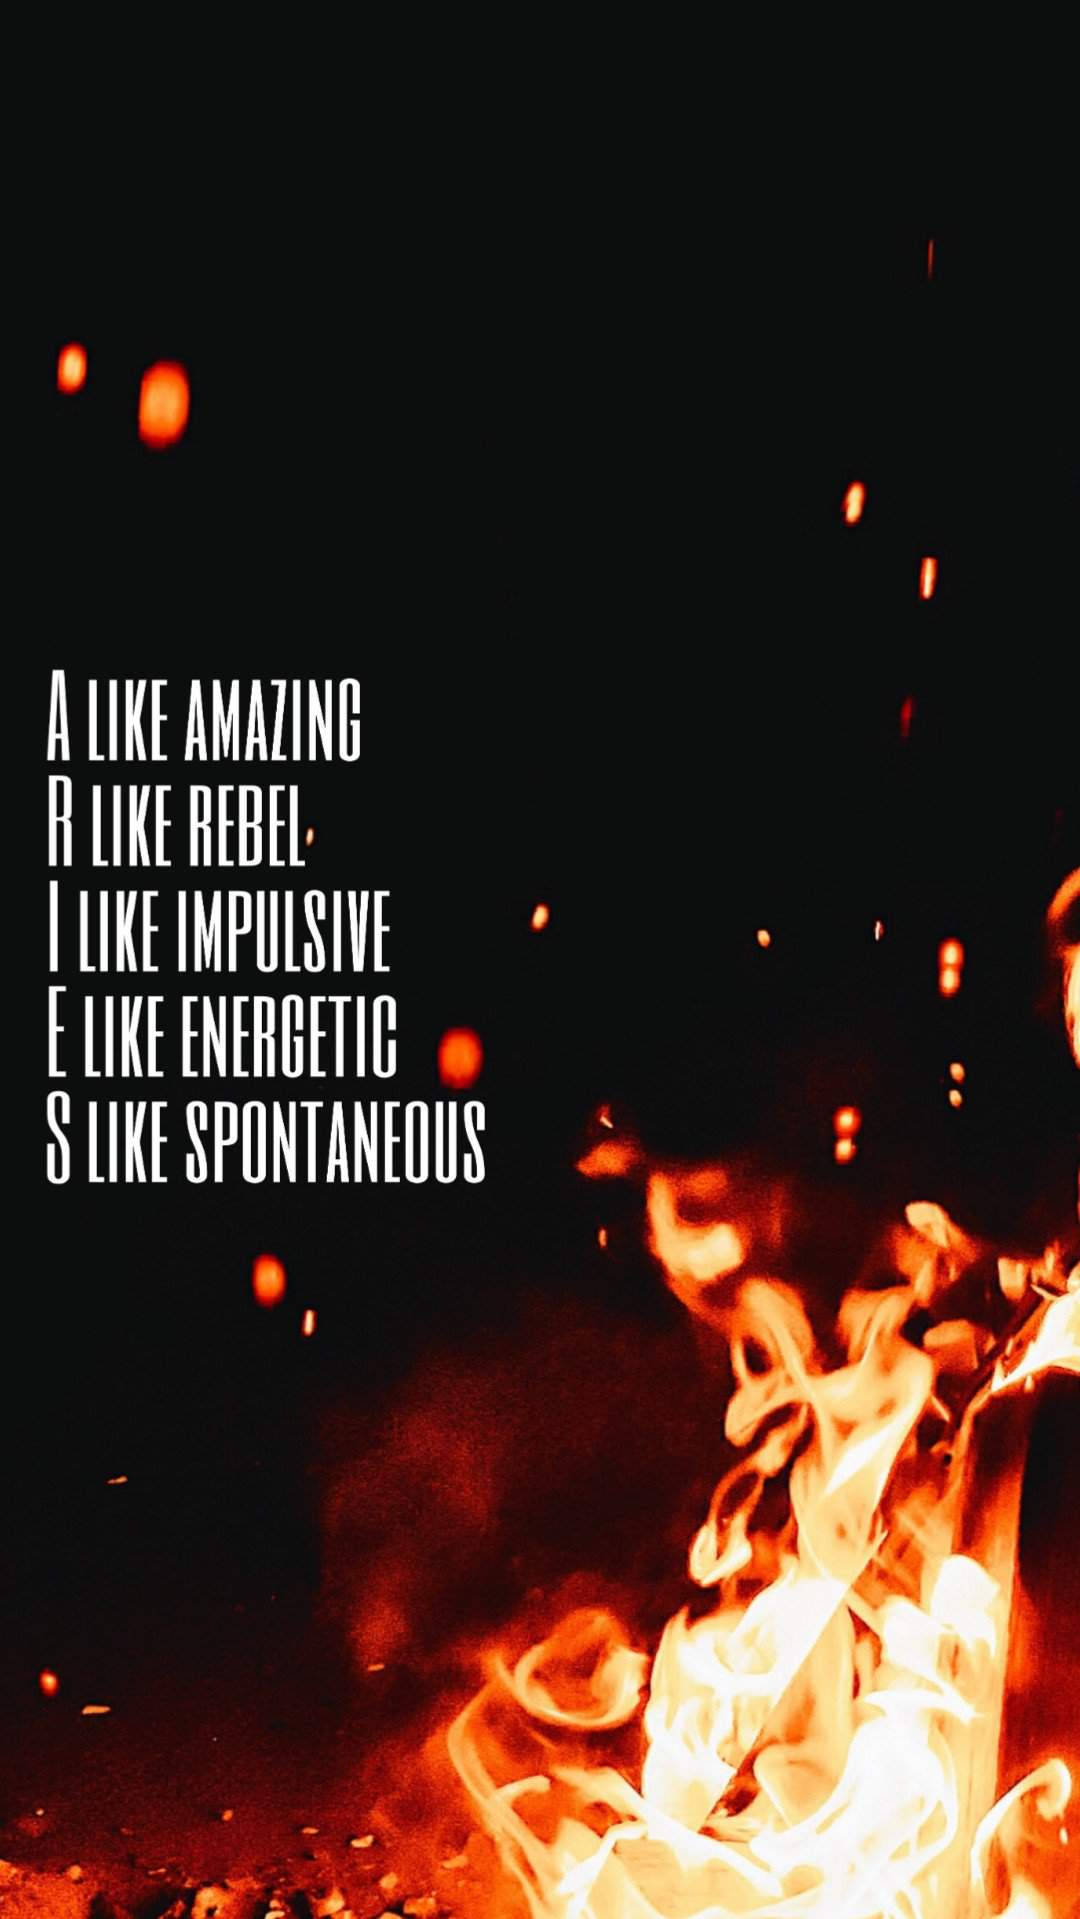 Aries Aesthetic Meaning With Fire Wallpaper